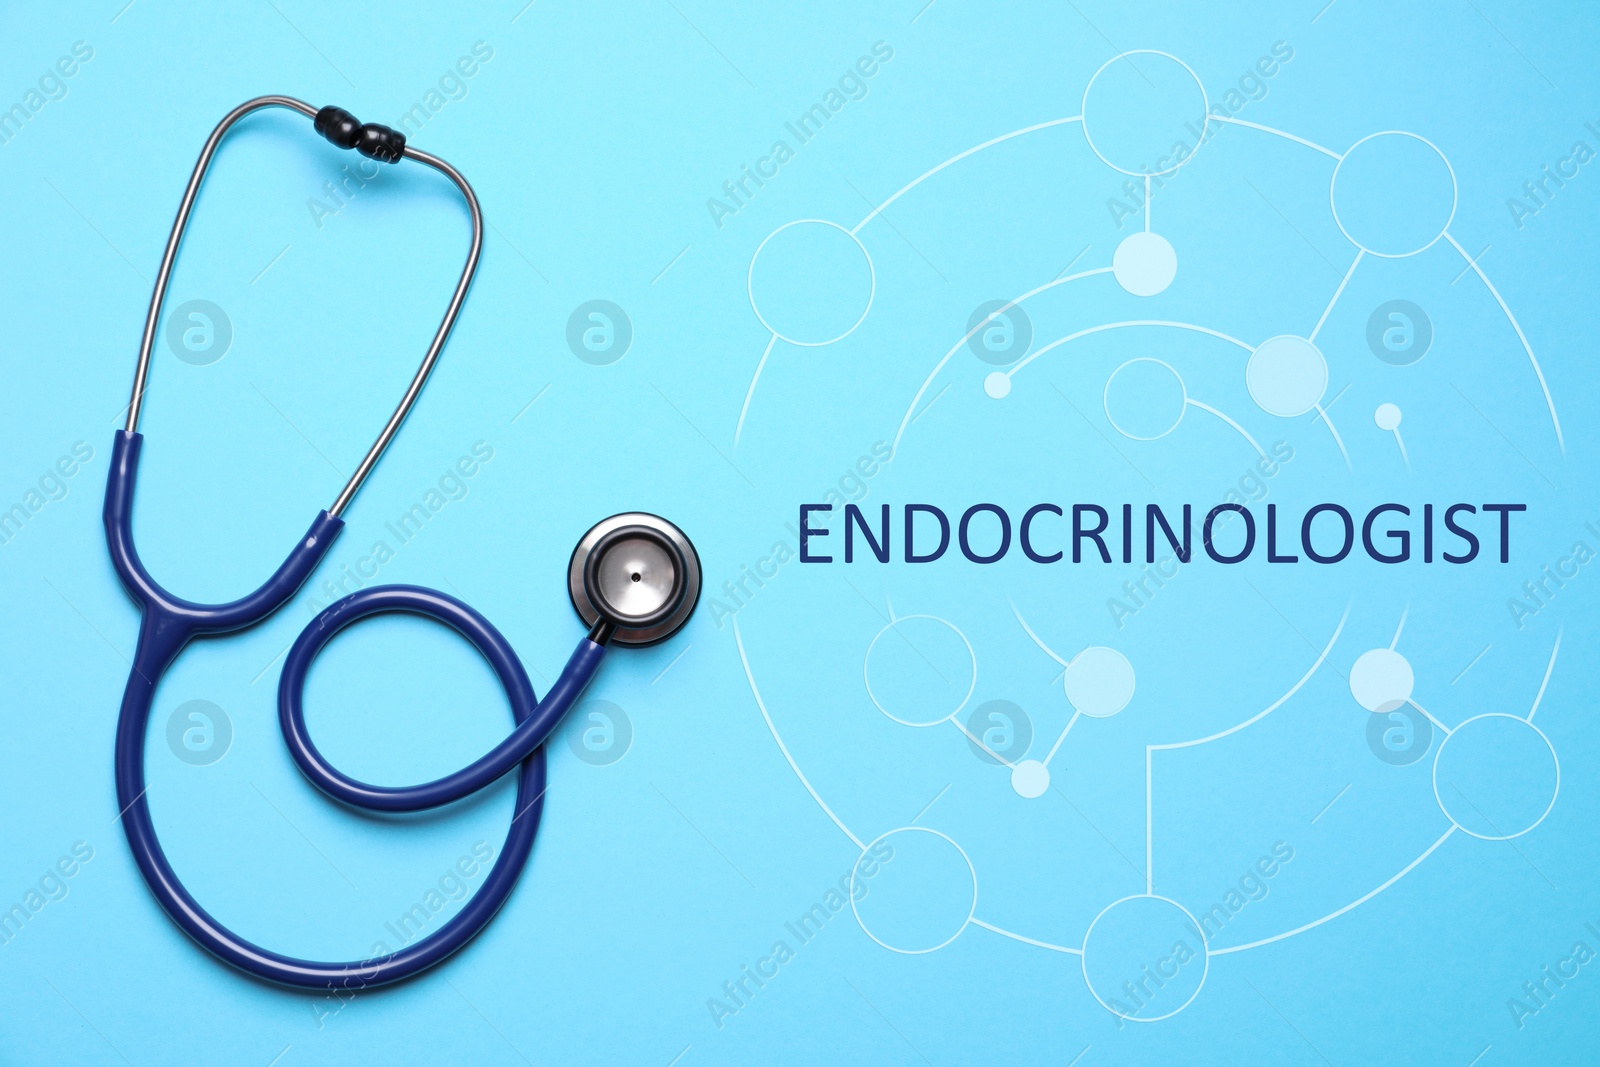 Image of Endocrinologist. Stethoscope and scheme on light blue background, top view